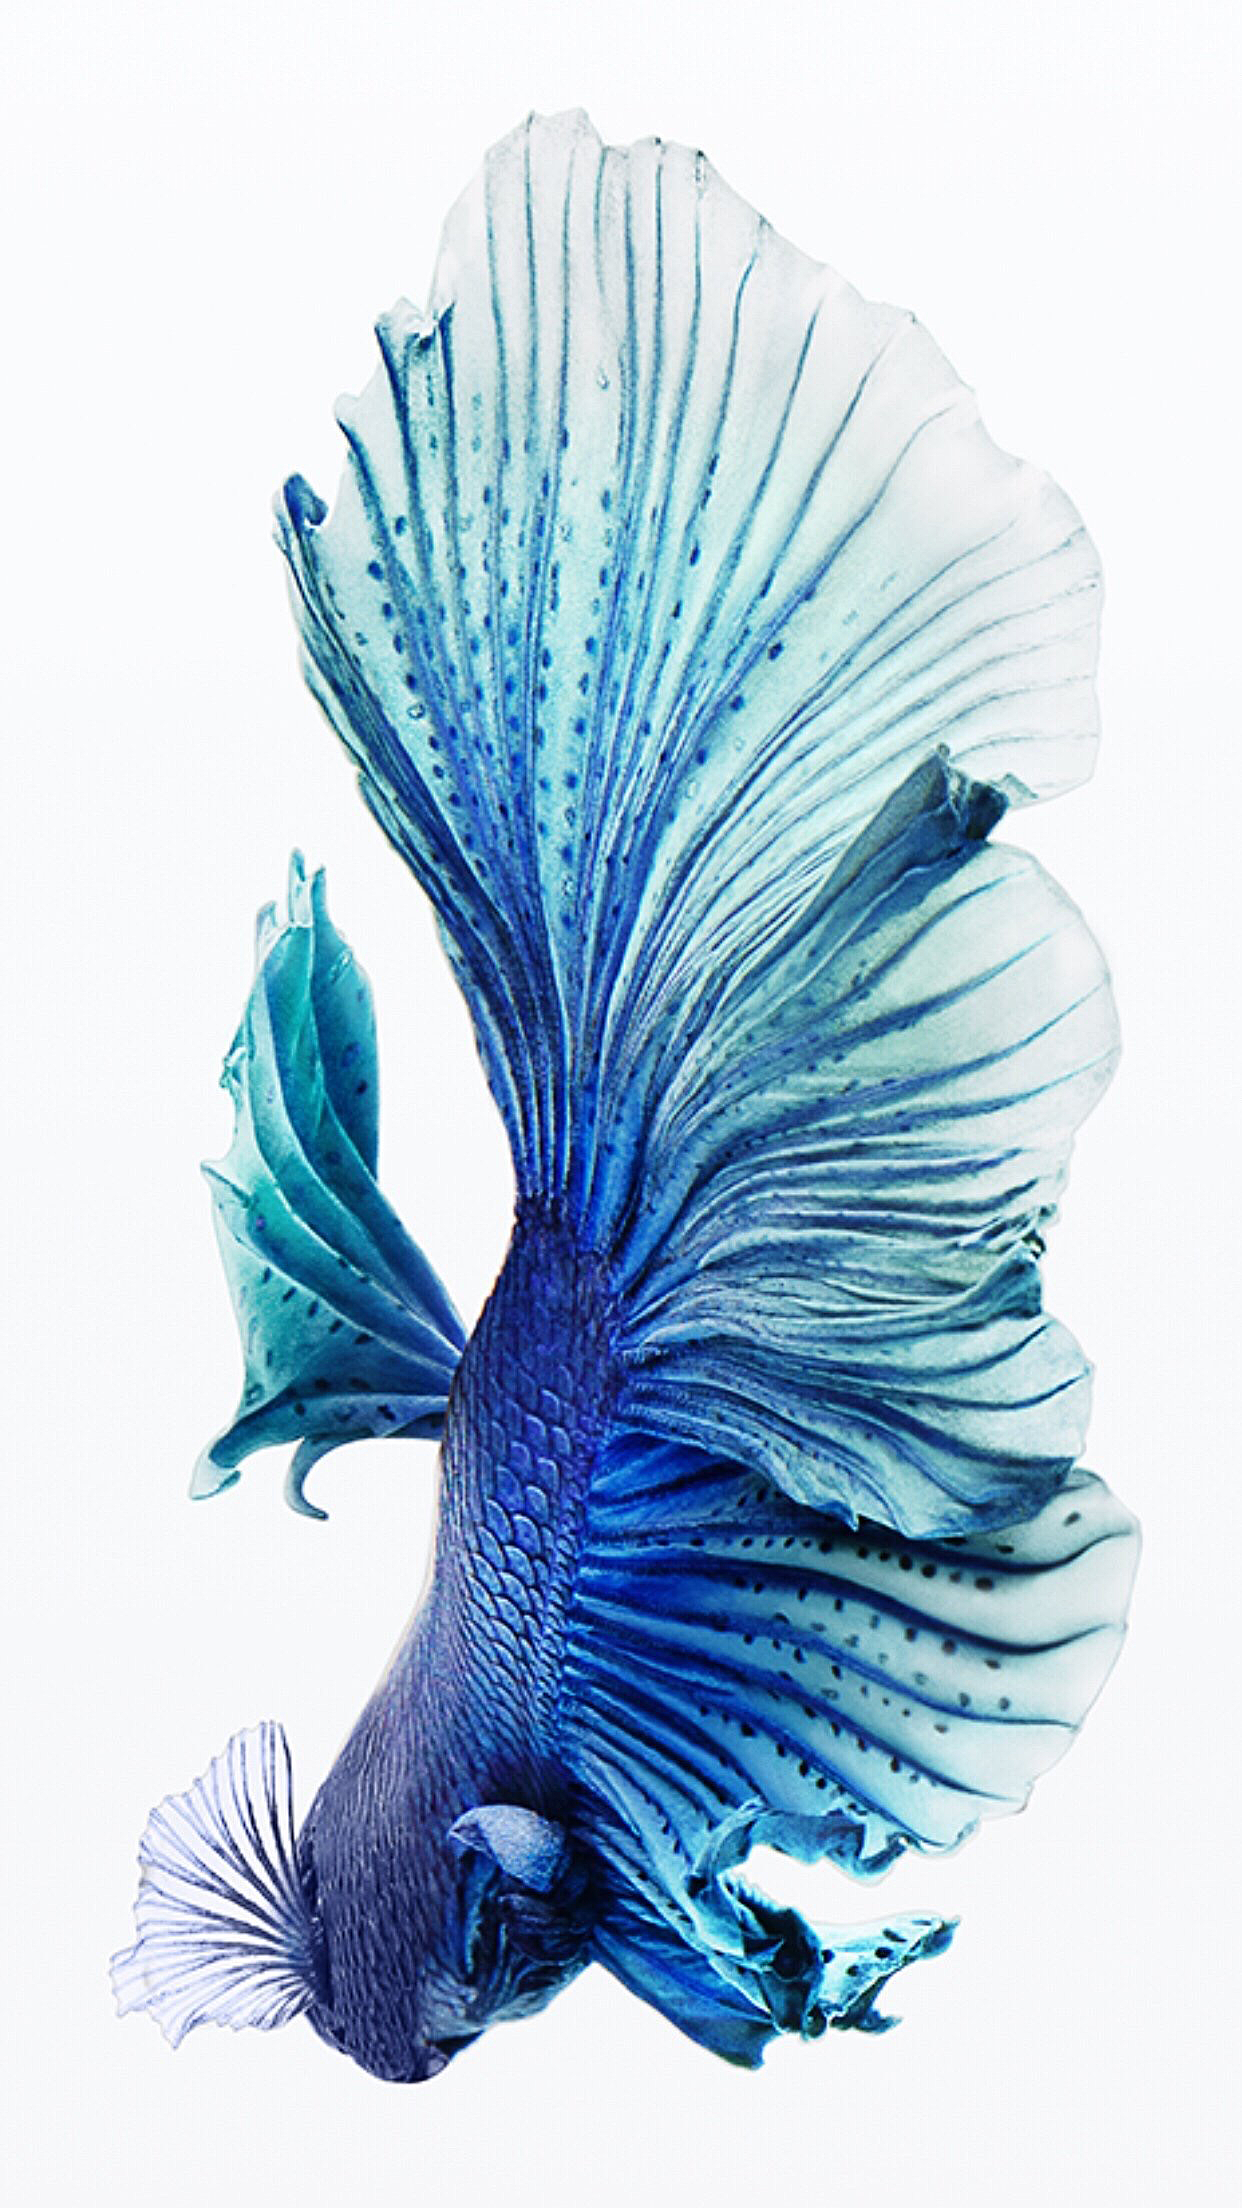 iphone fish wallpaper hd,blue,feather,turquoise,teal,peafowl